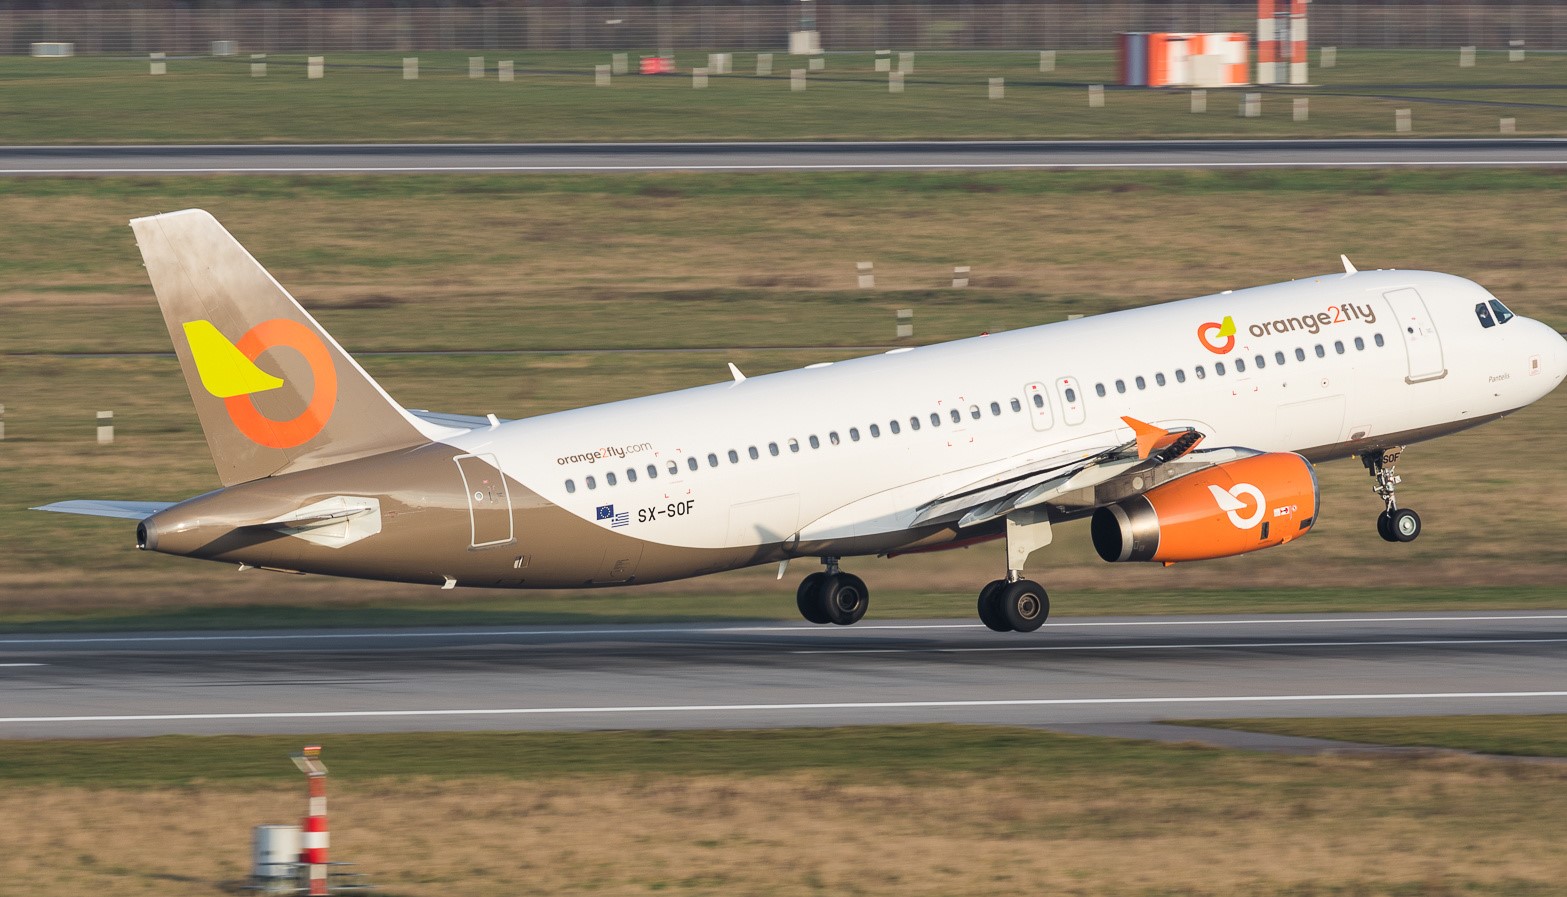 Air Charter Service marketing one A320 for Orange2Fly